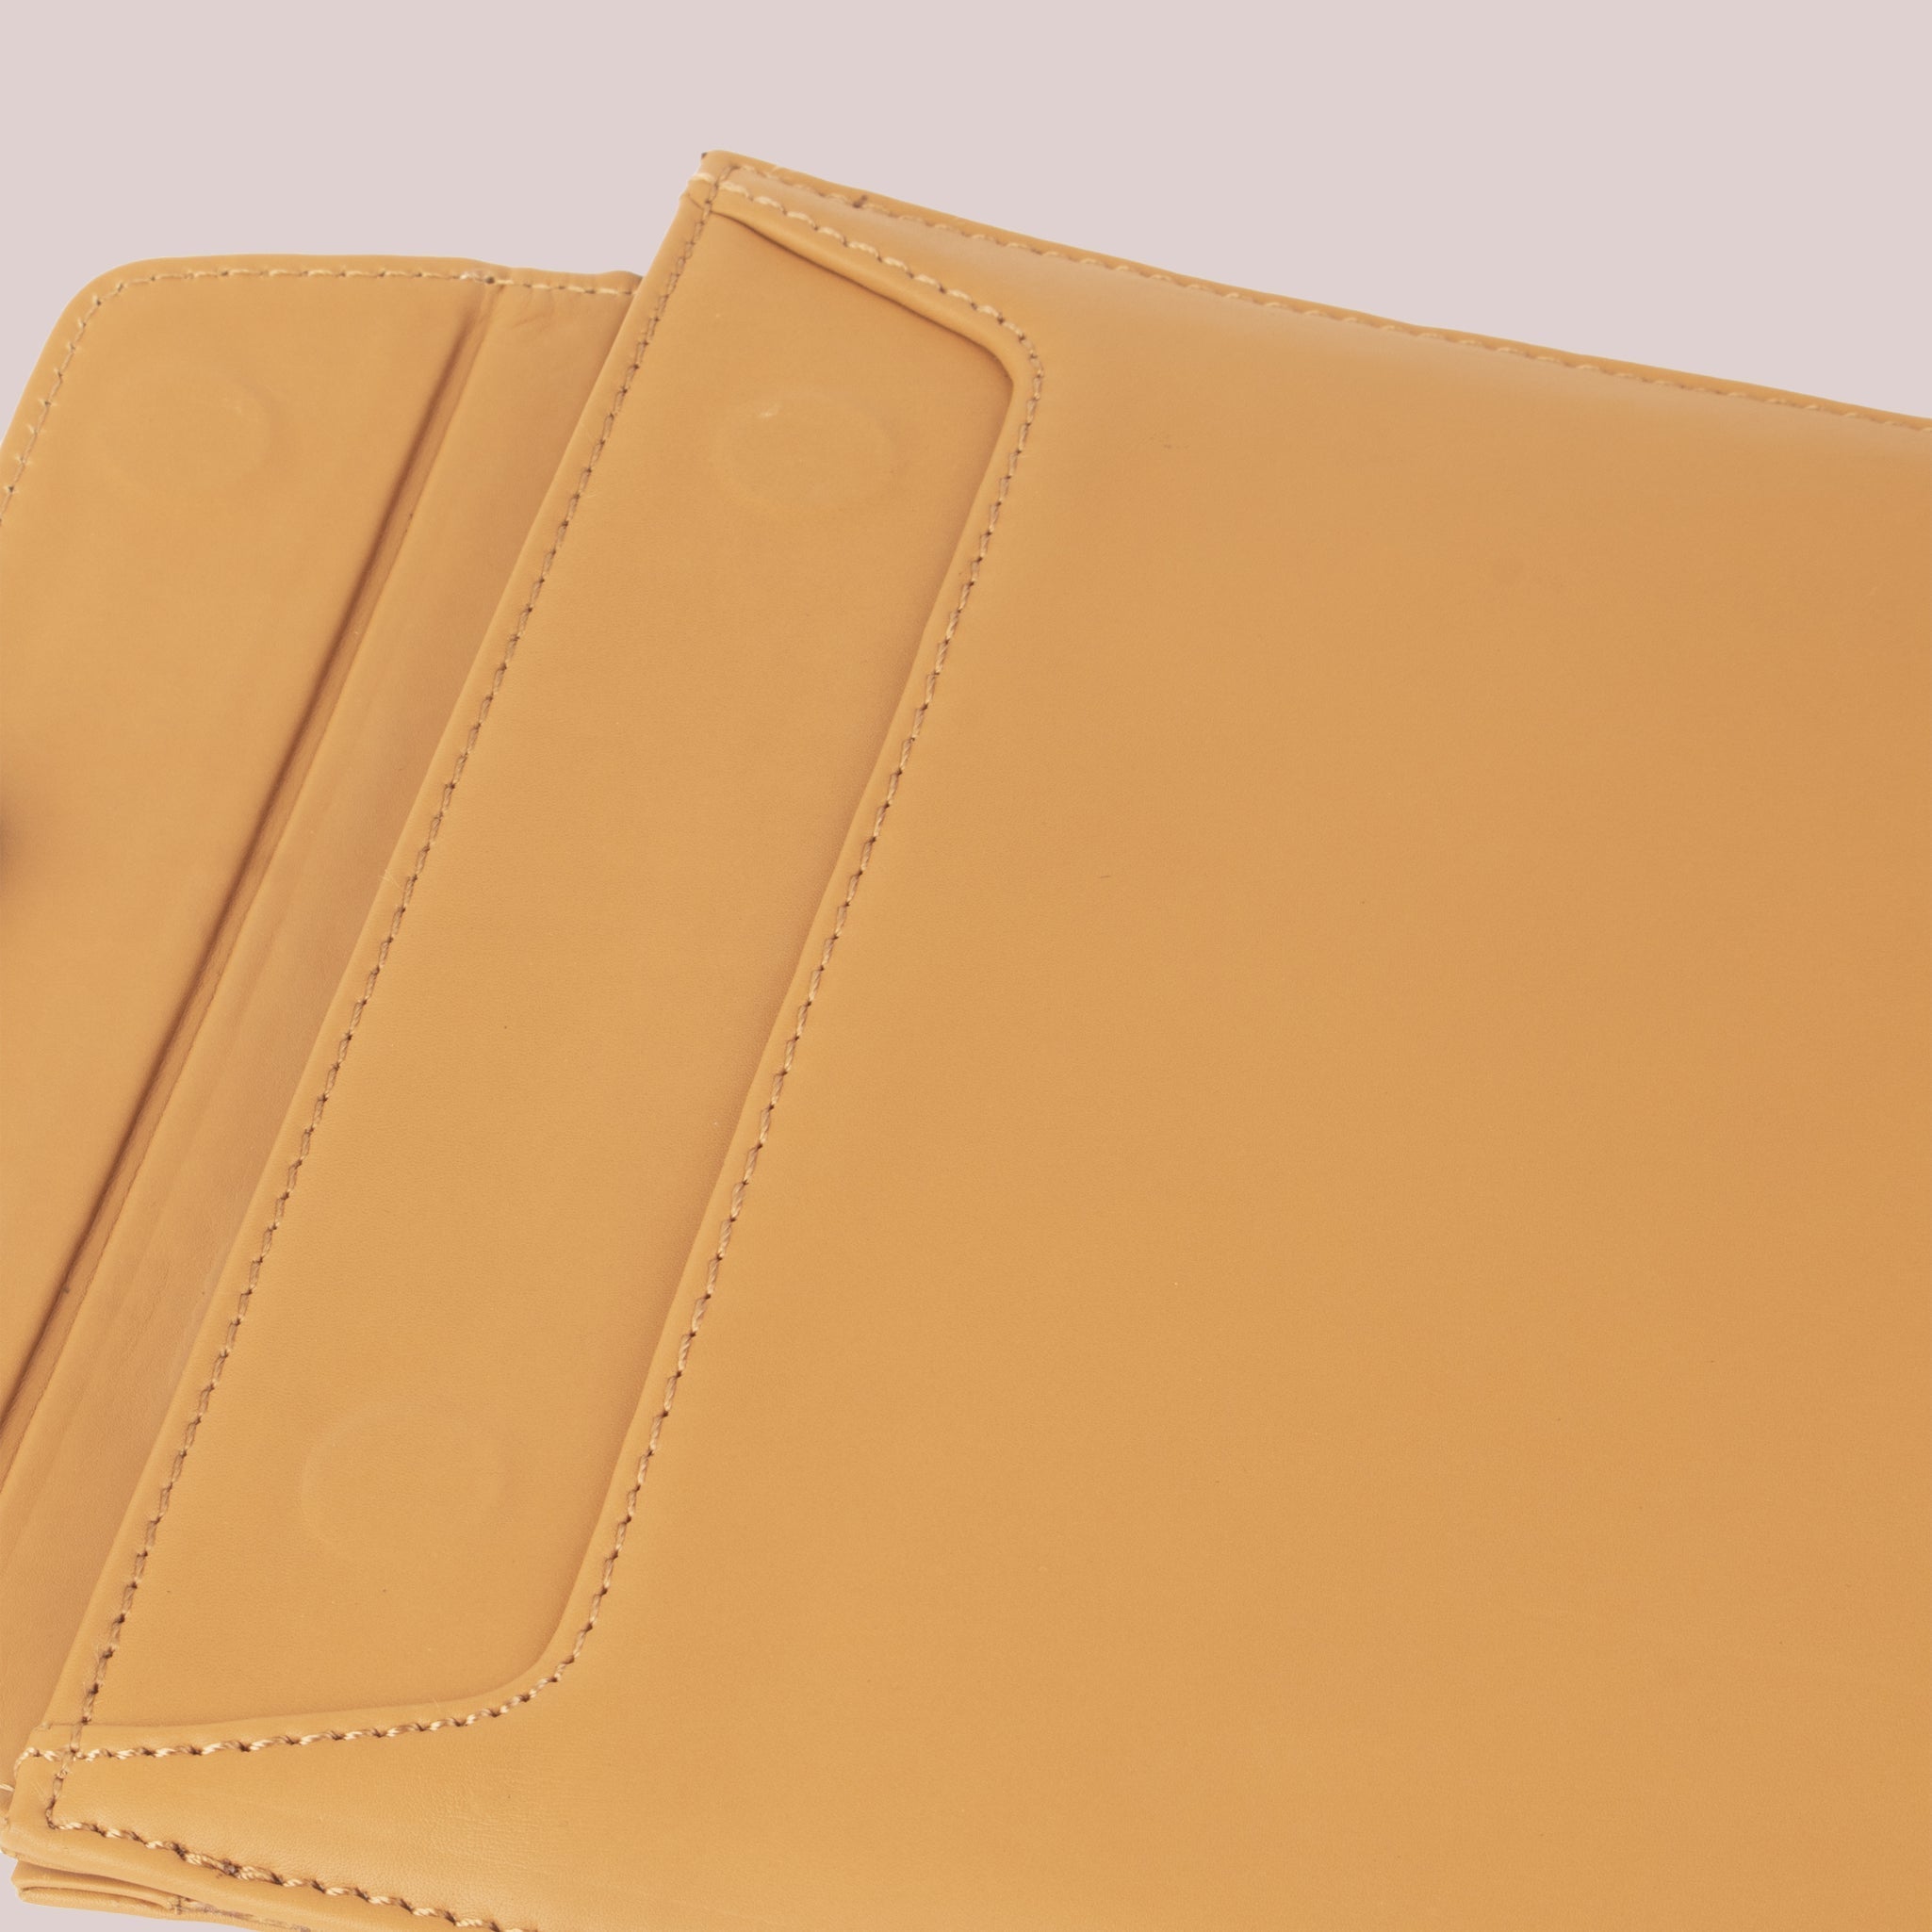 Shop Yellow leather sleeve for Macbook